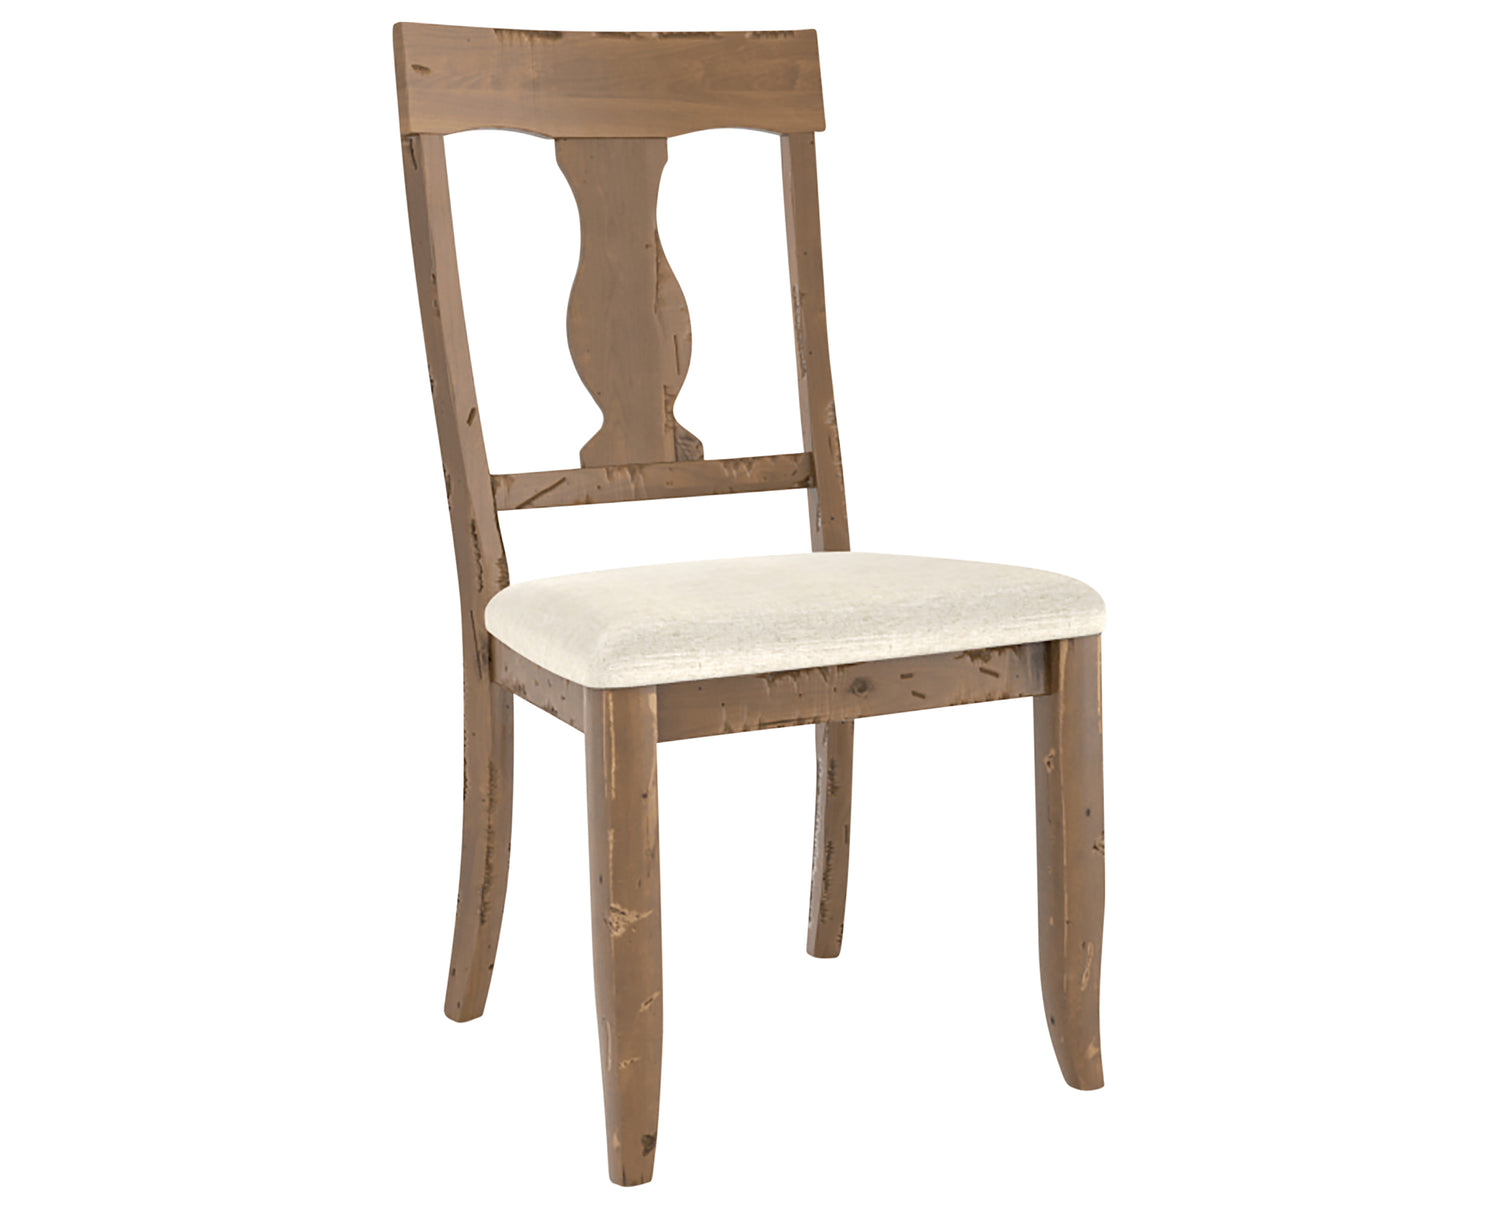 Oak Washed & Fabric TW | Canadel Champlain Dining Chair 5077 | Valley Ridge Furniture